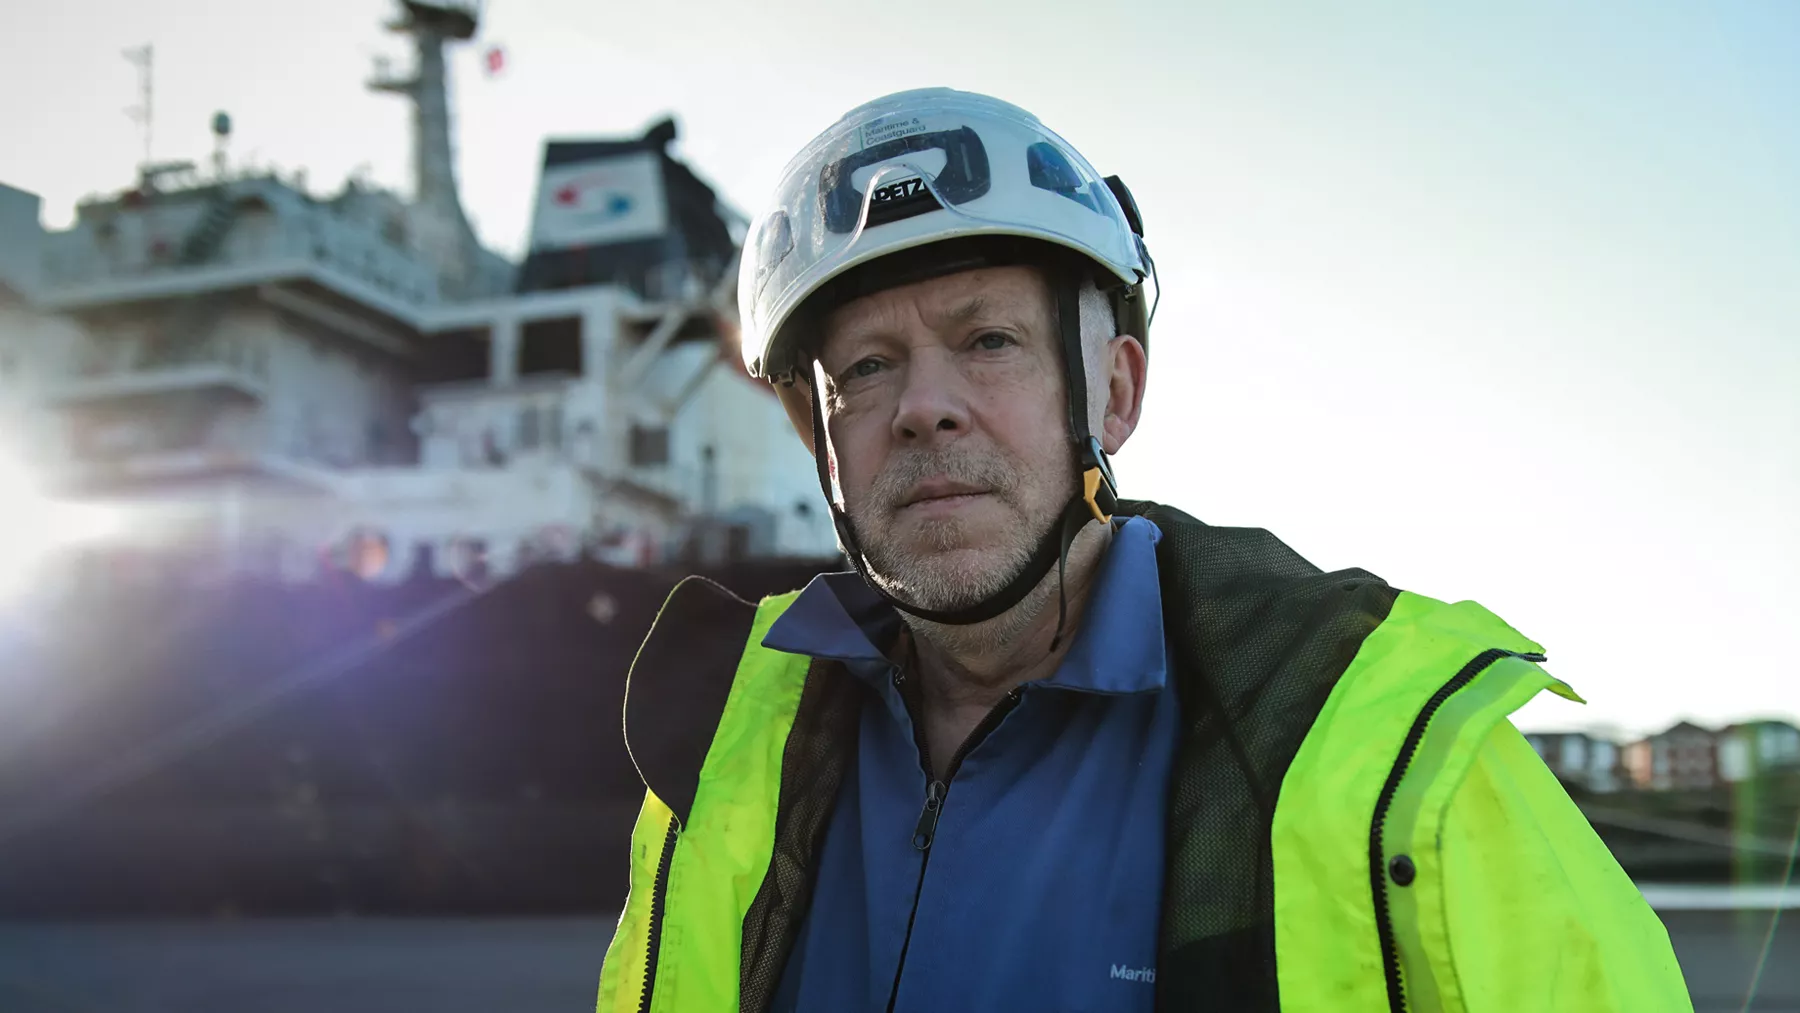 A male surveyor in a high-vis jacket looks to the camera. In the background a large ship is blurred from view.